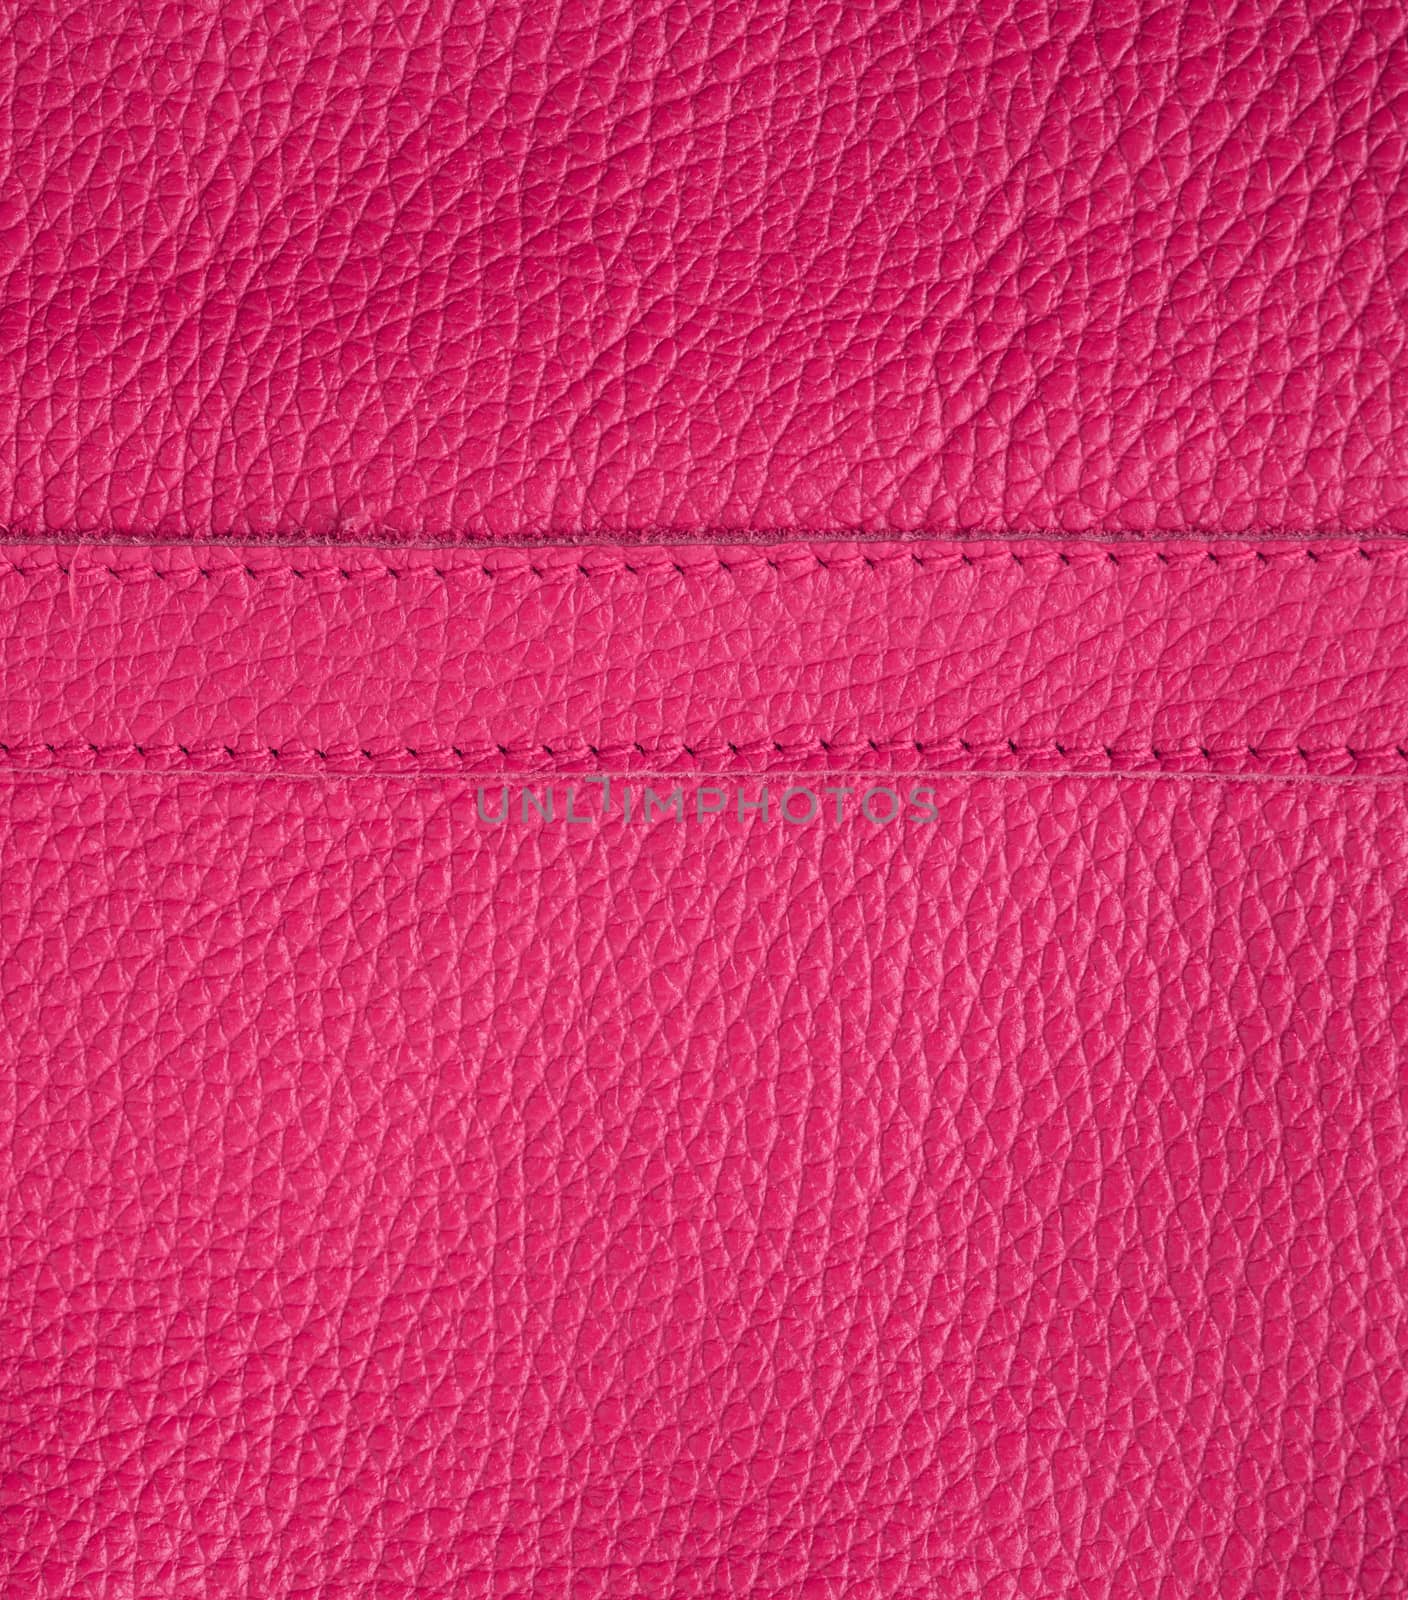 natural bright pink cowhide texture, full frame, scarlet color, close up